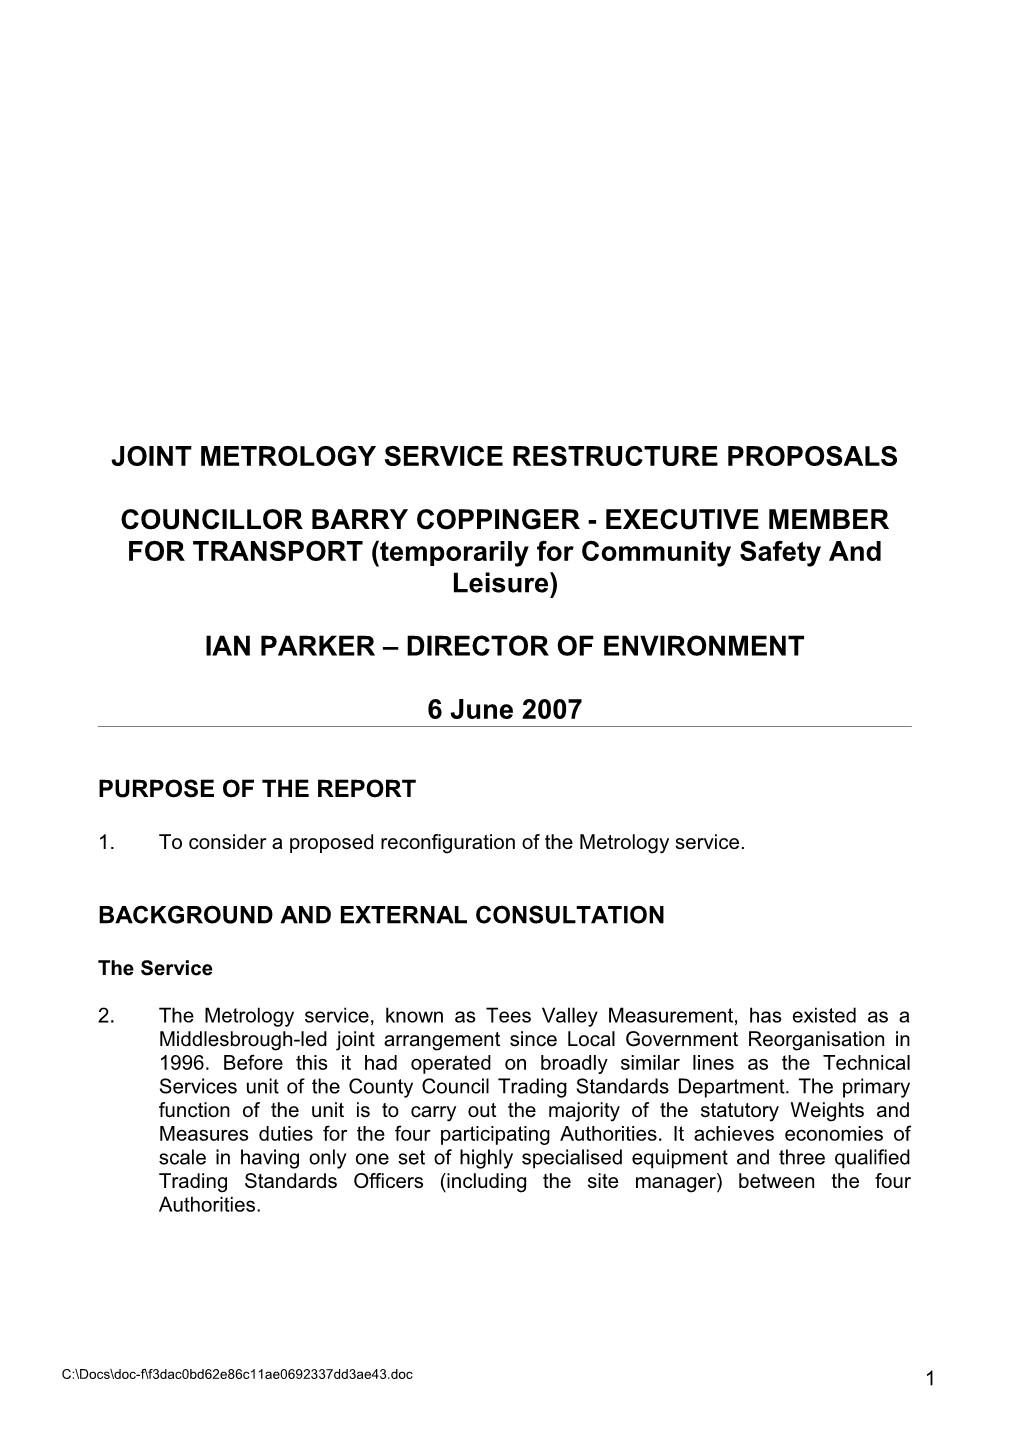 Joint Metrology Service Restructure Proposals